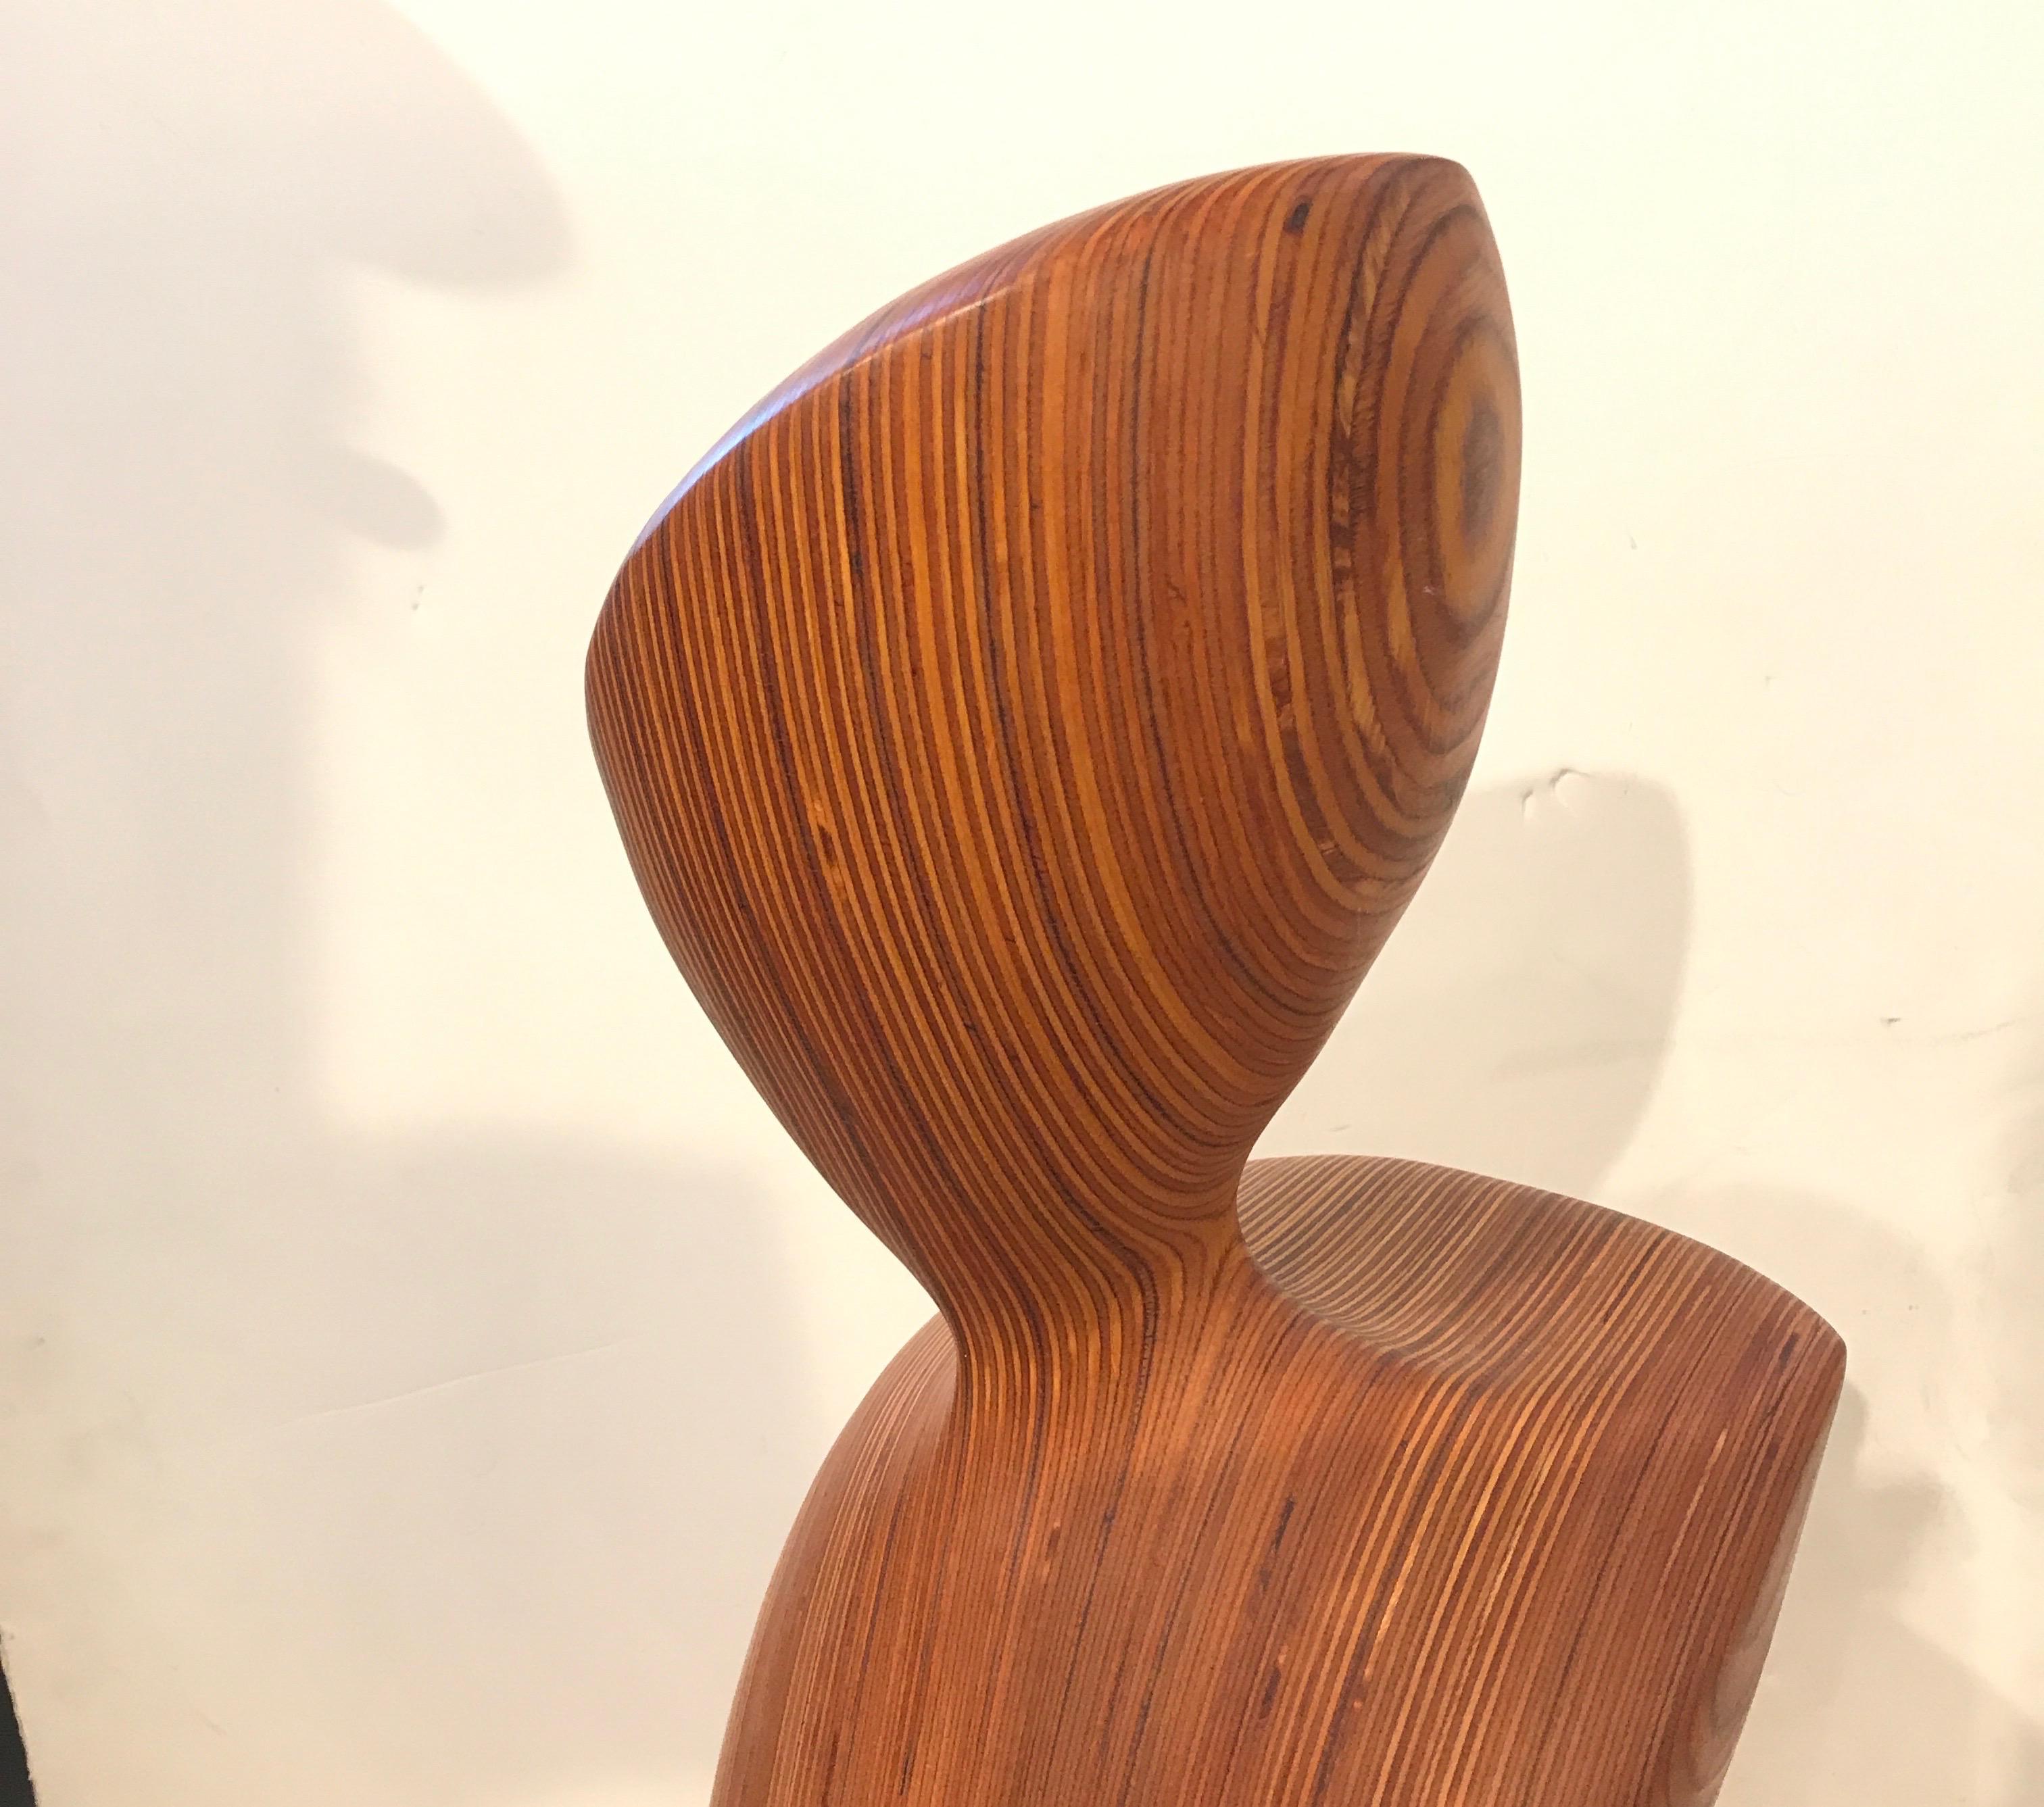 A midcentury abstract sculpture of a woman made from laminated layers of wood. Shapely figure with the head, torso and hips with the interesting layers of laminated solid wood, USA, circa 1960.